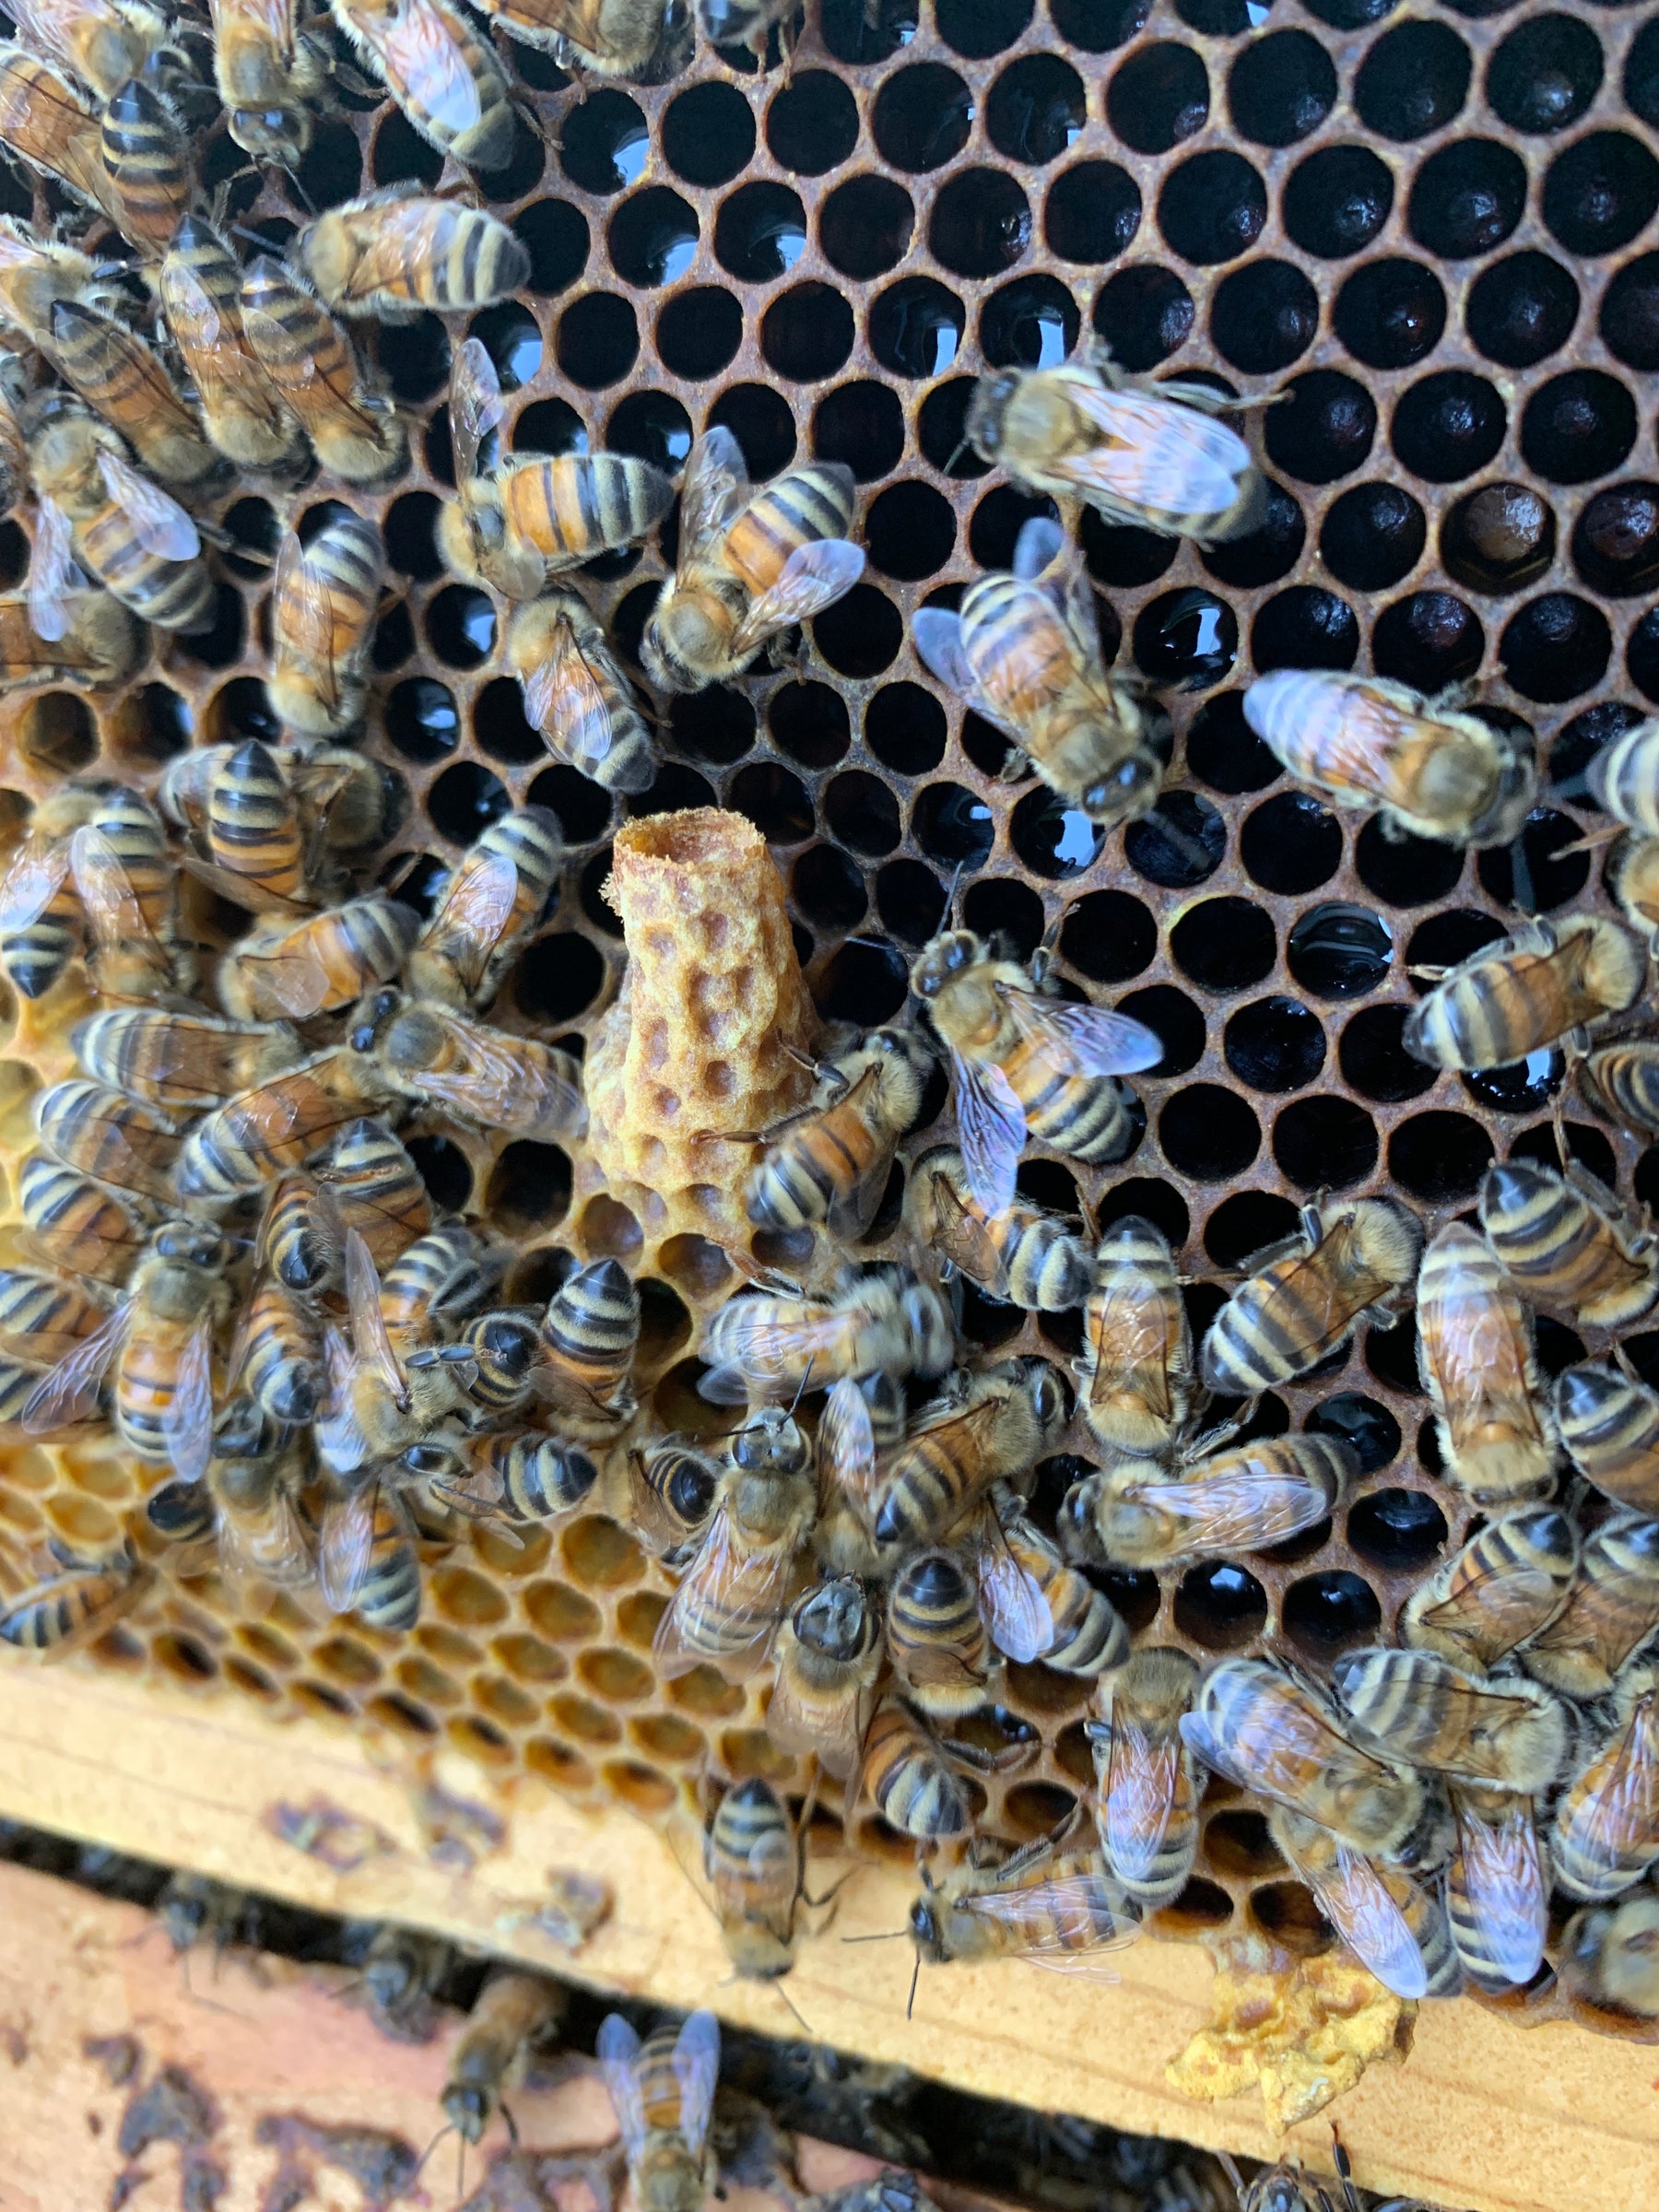 Requeening vs letting bees raise their own